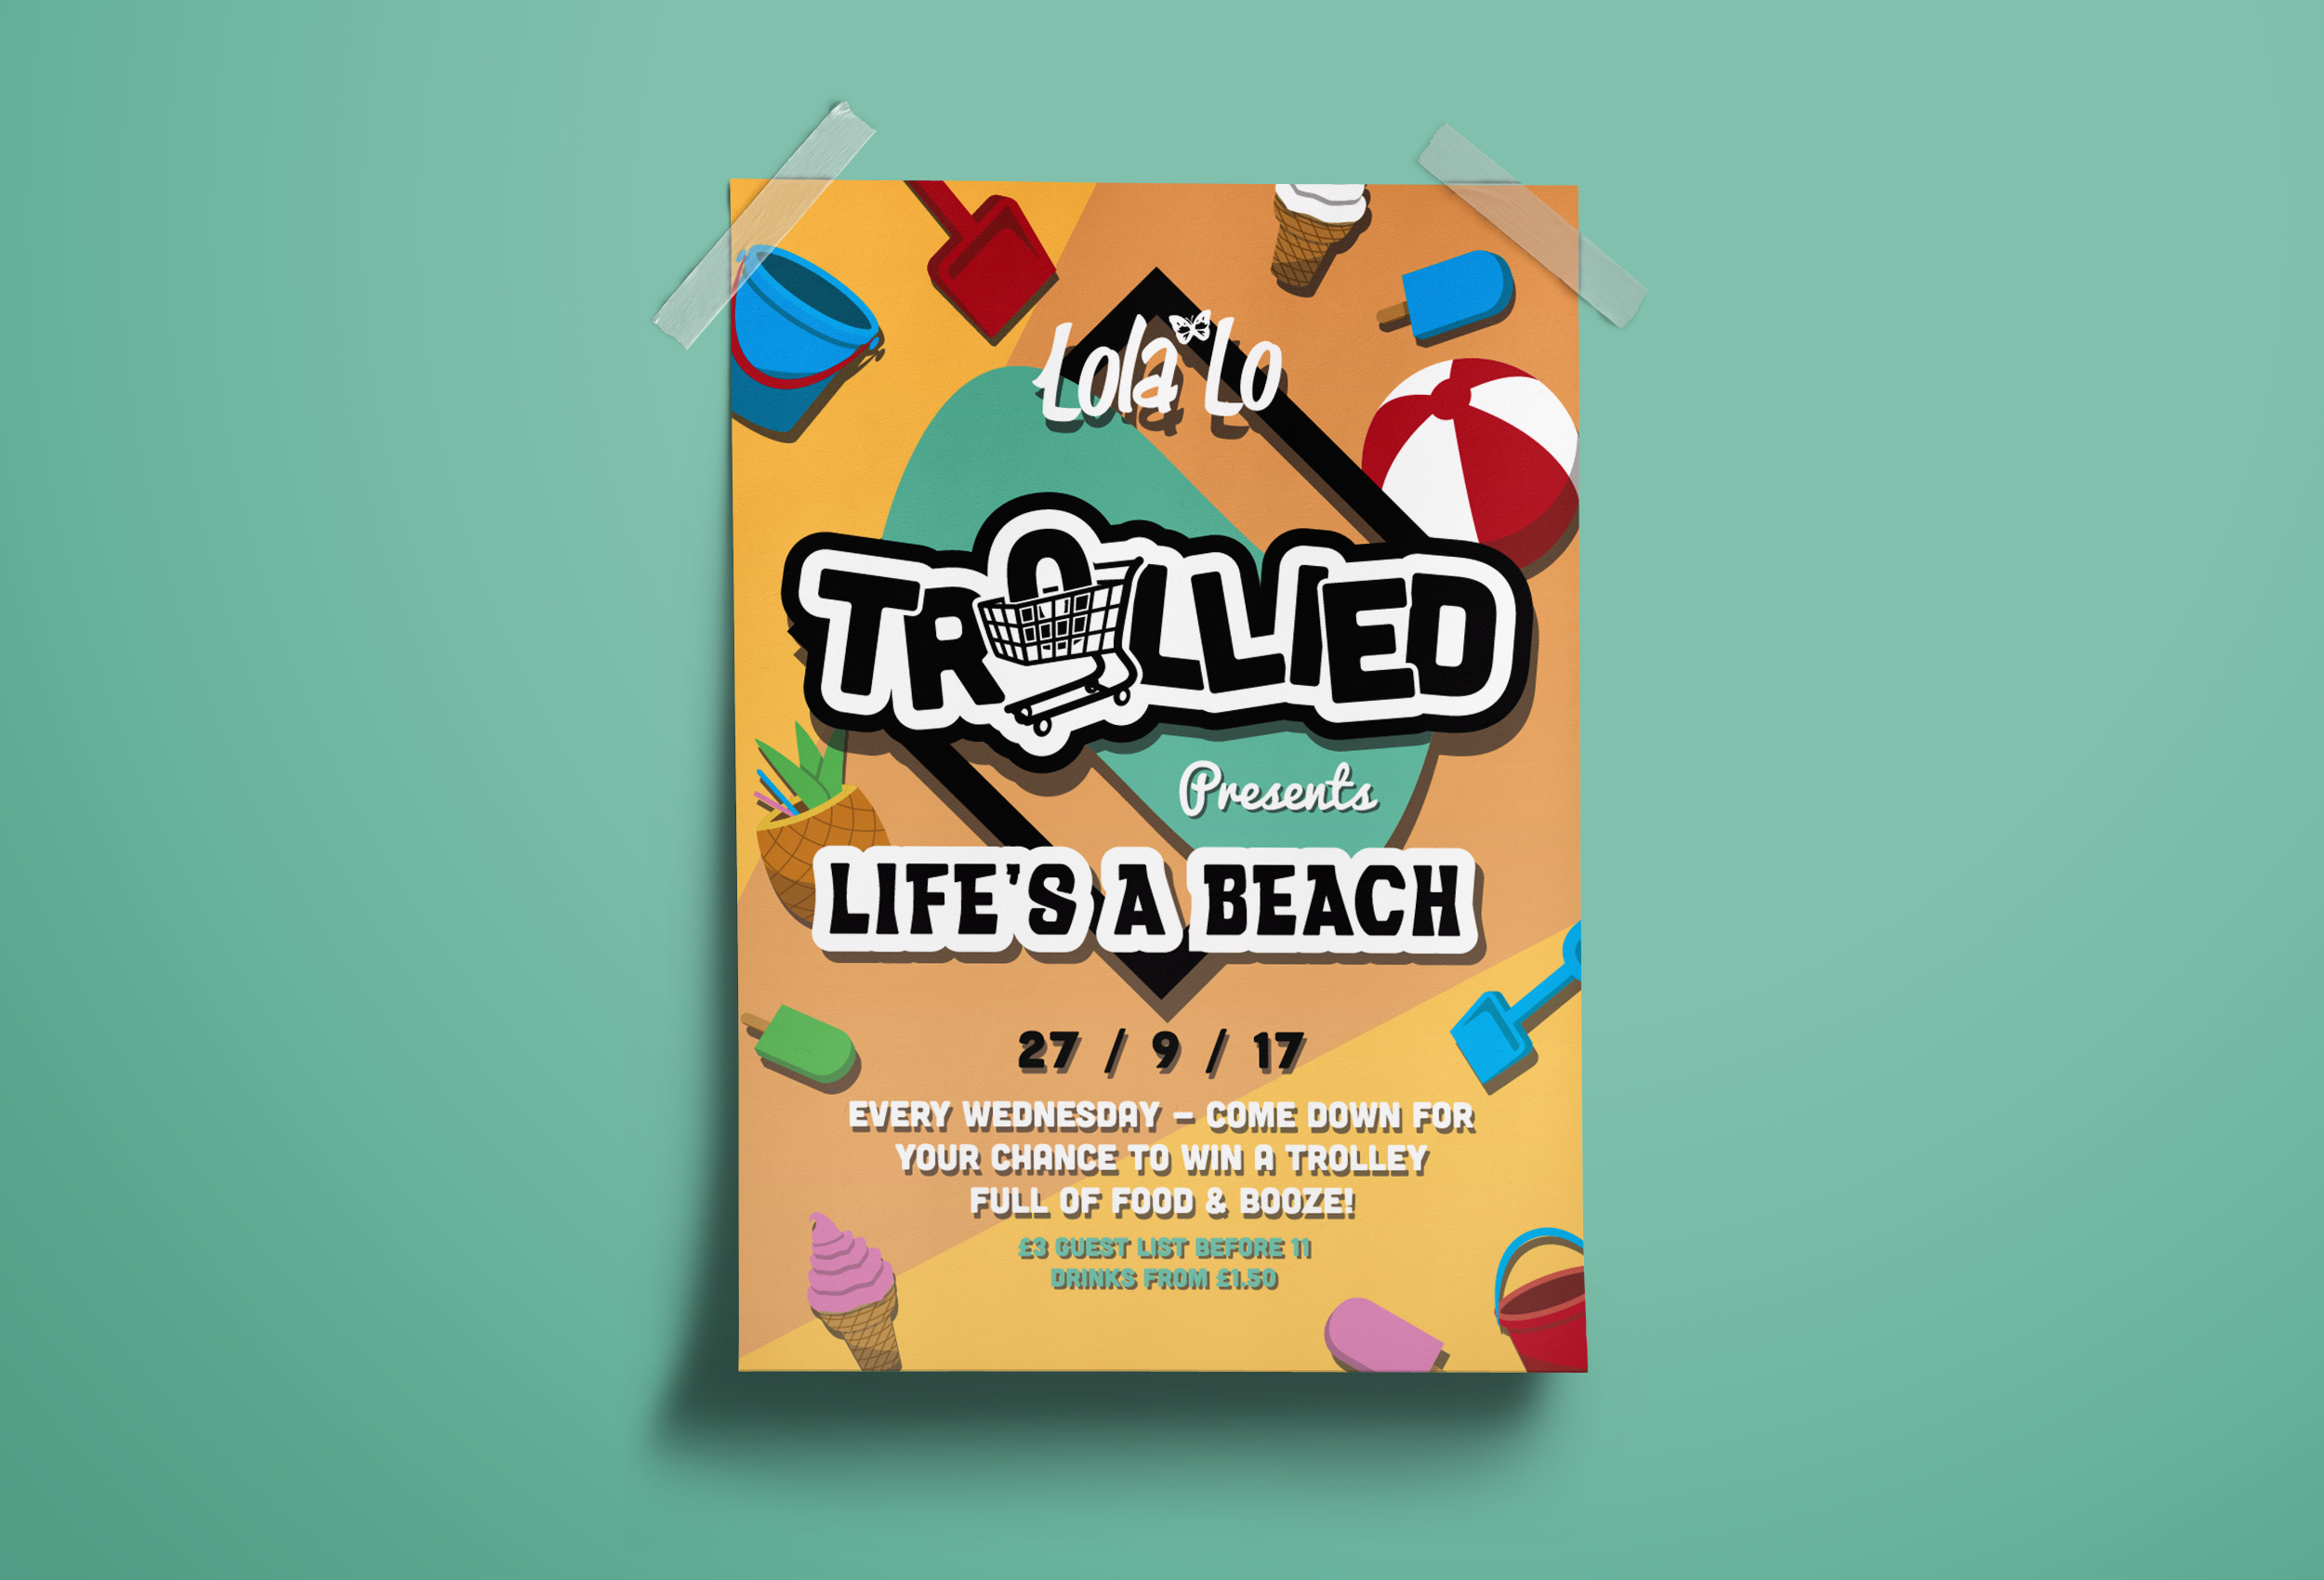 Trollied Life's A Beach poster design.